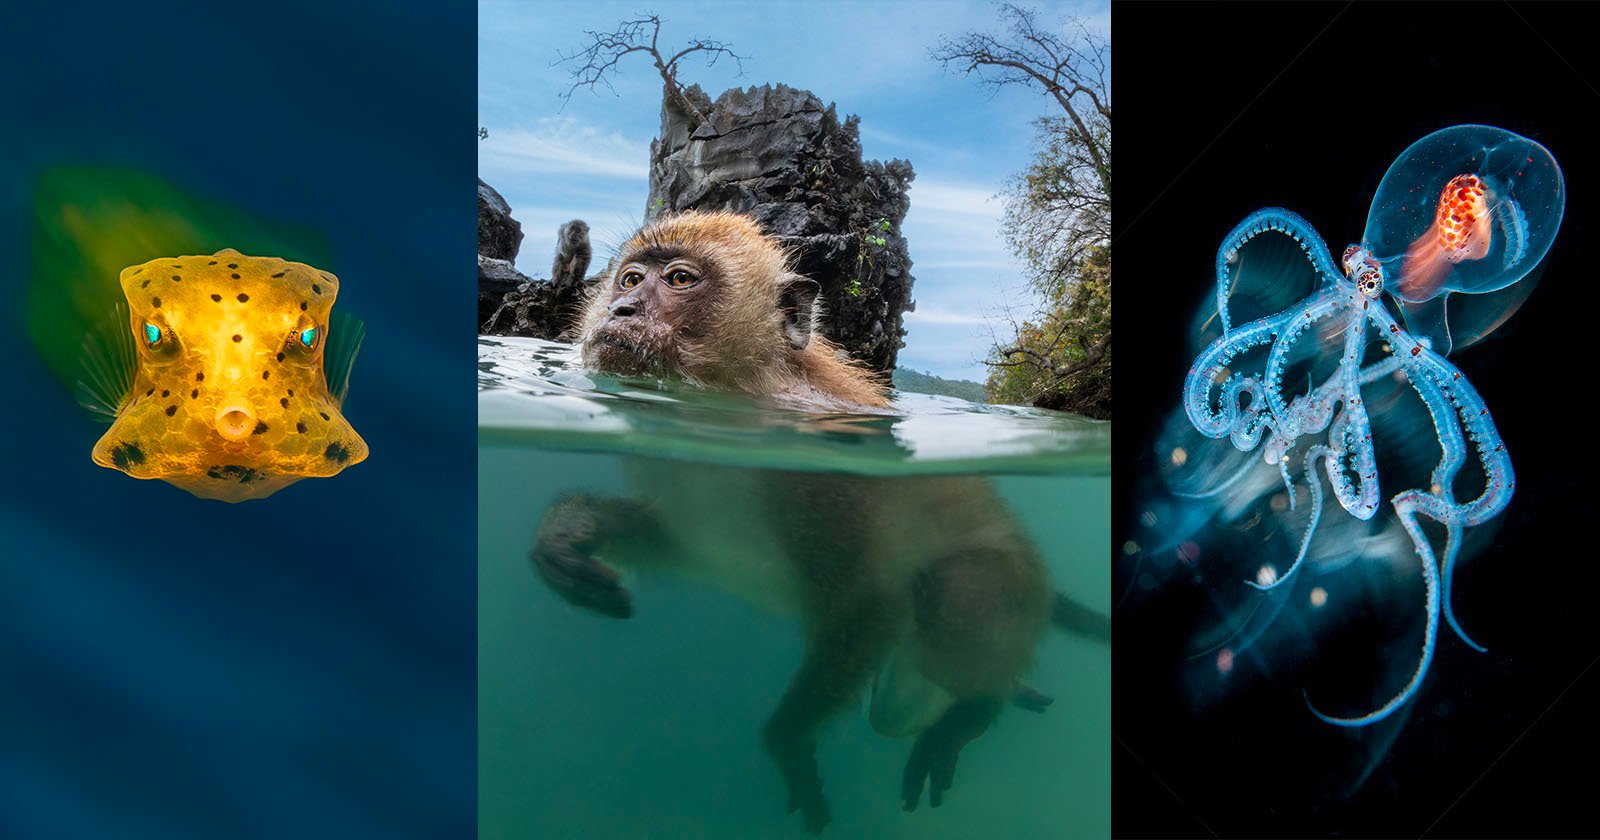  underwater photo competition sees swimming monkeys alien 